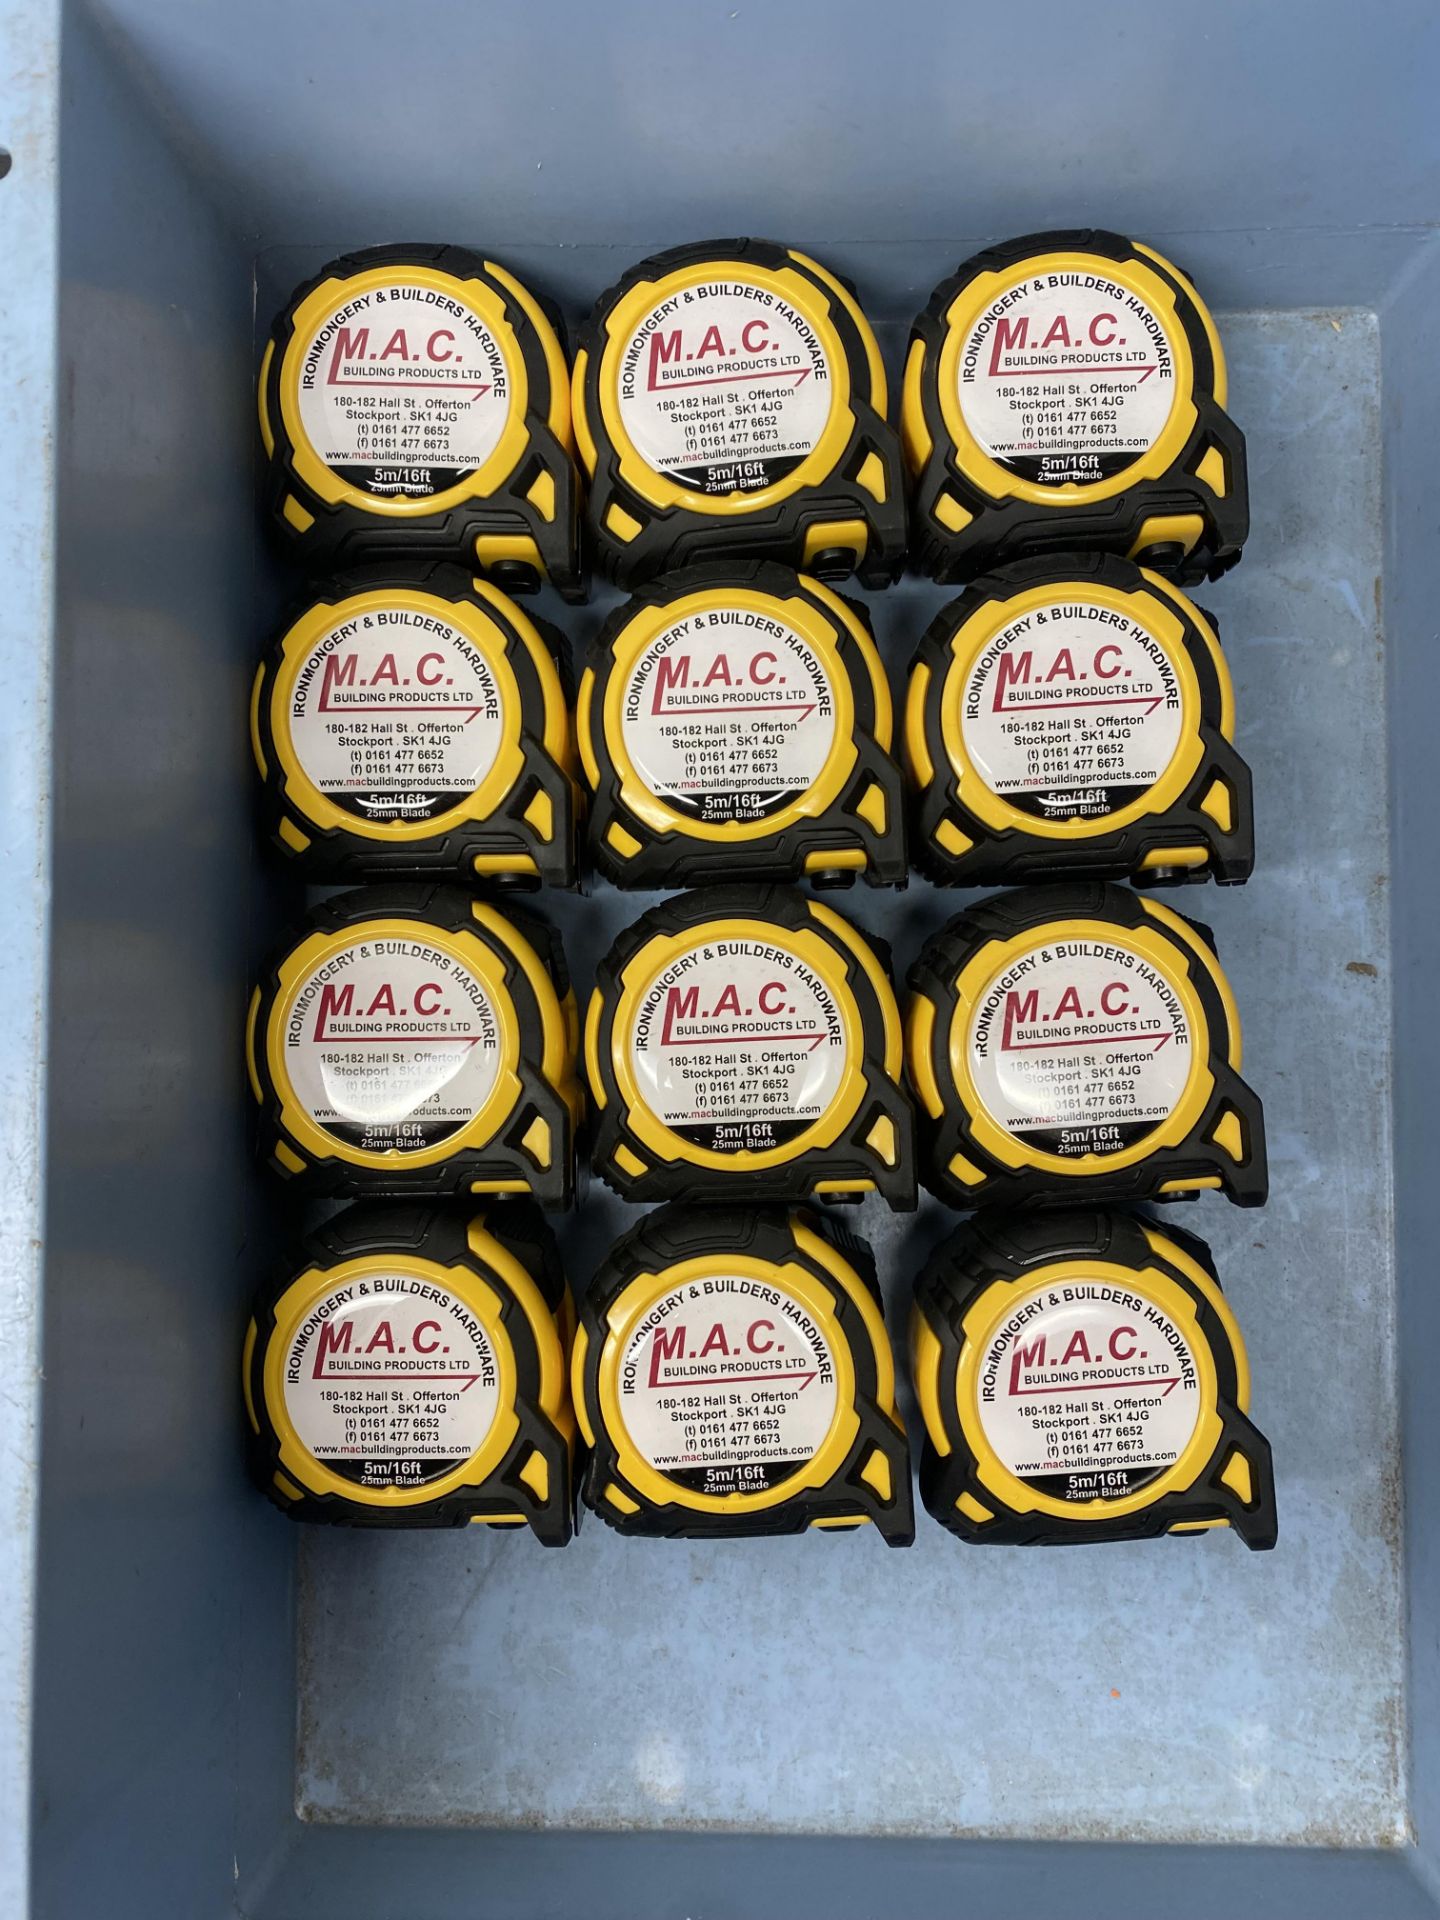 60 x M.A.C Building Products Ltd Branded 5M/16ft Tape Measures - Image 3 of 4